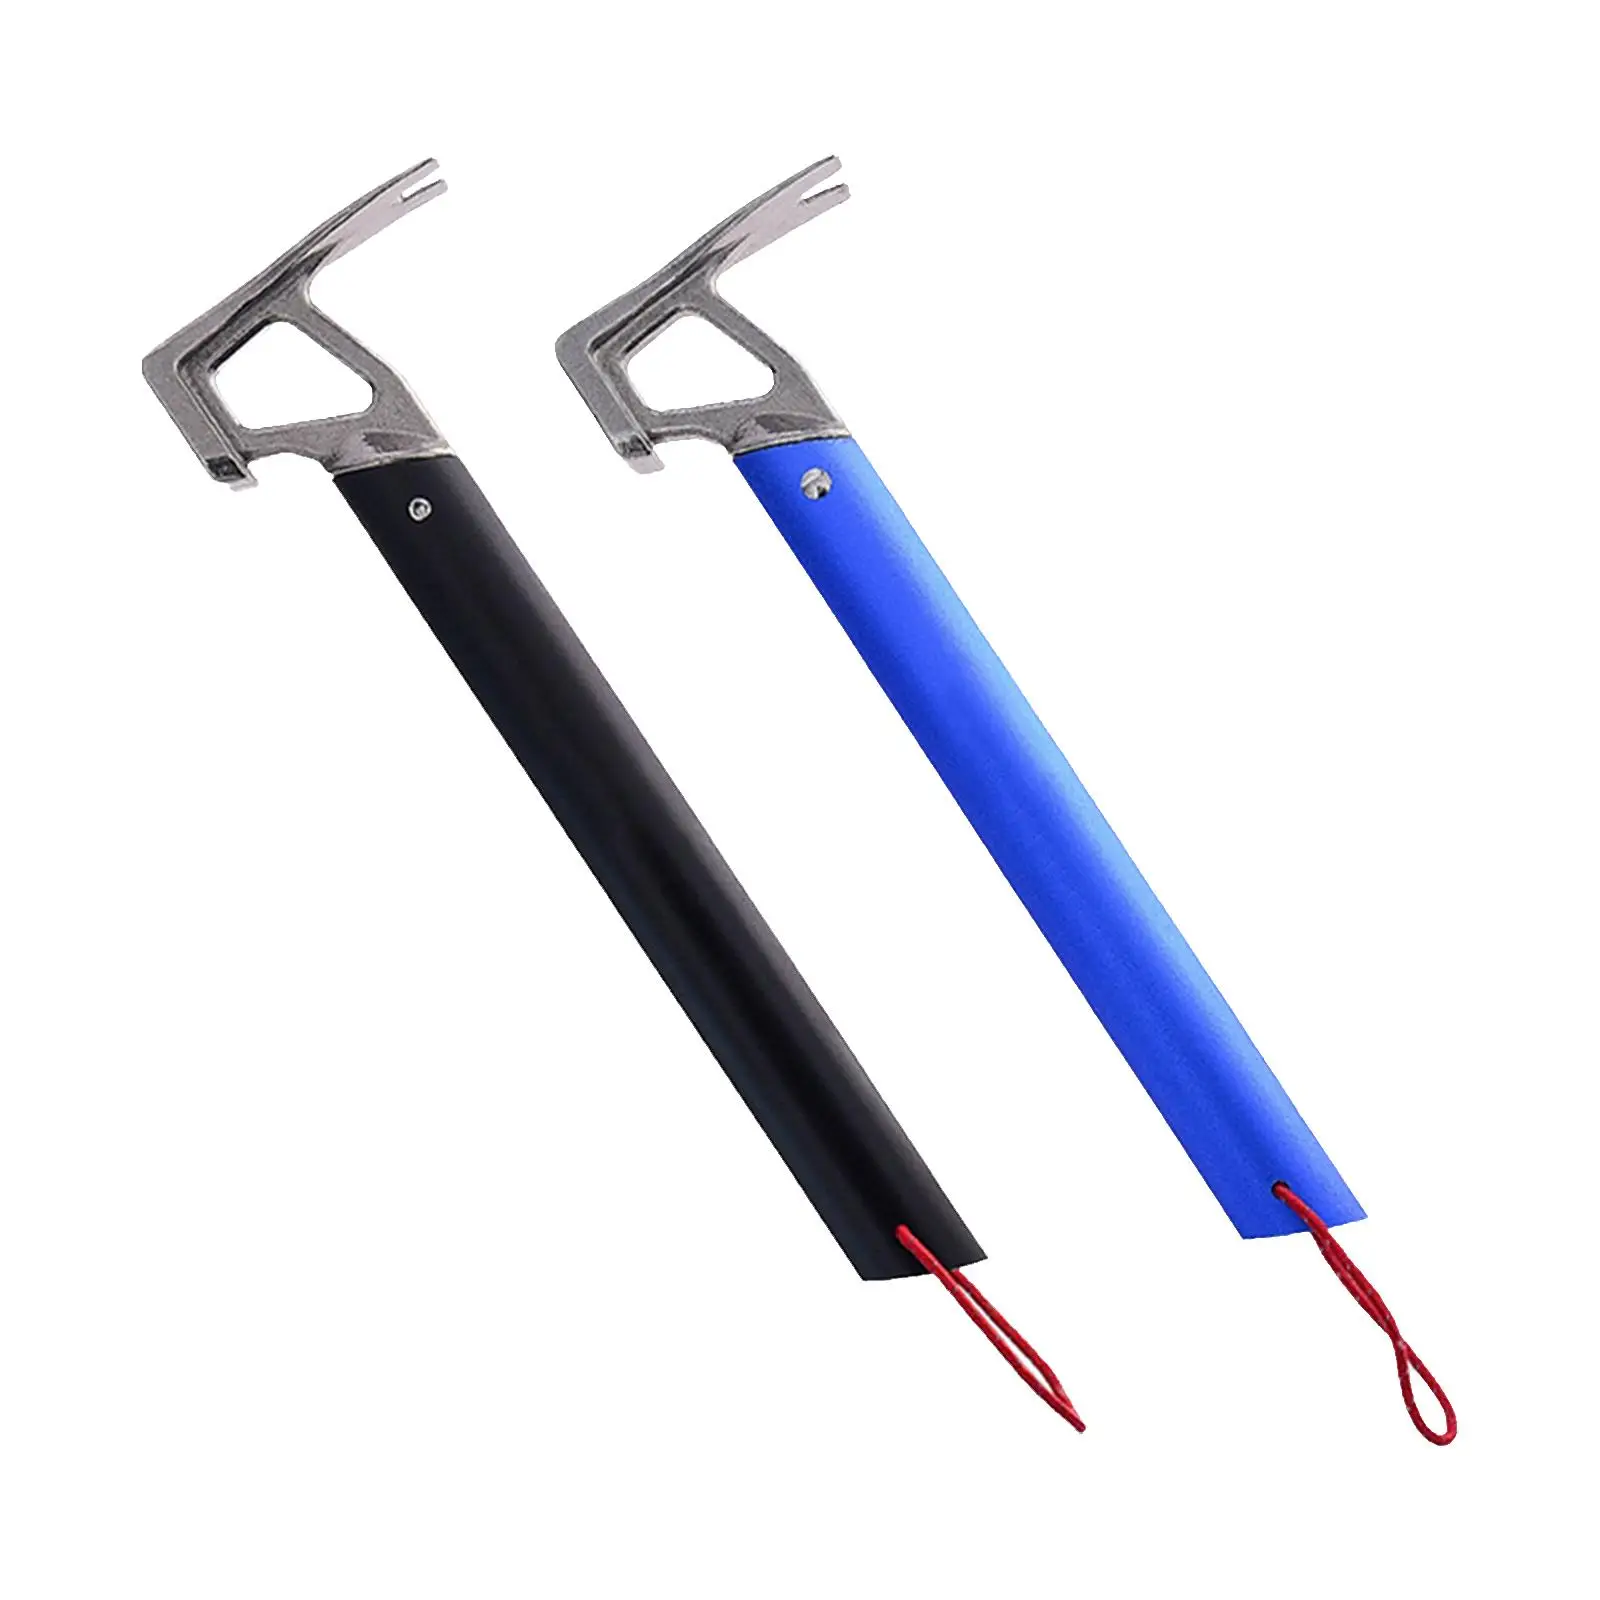 Tent Stake Extractor Puller Aluminum Handle Portable Outdoor Camping Hammer for Hiking Backpacking Climbing Gardening Hunting